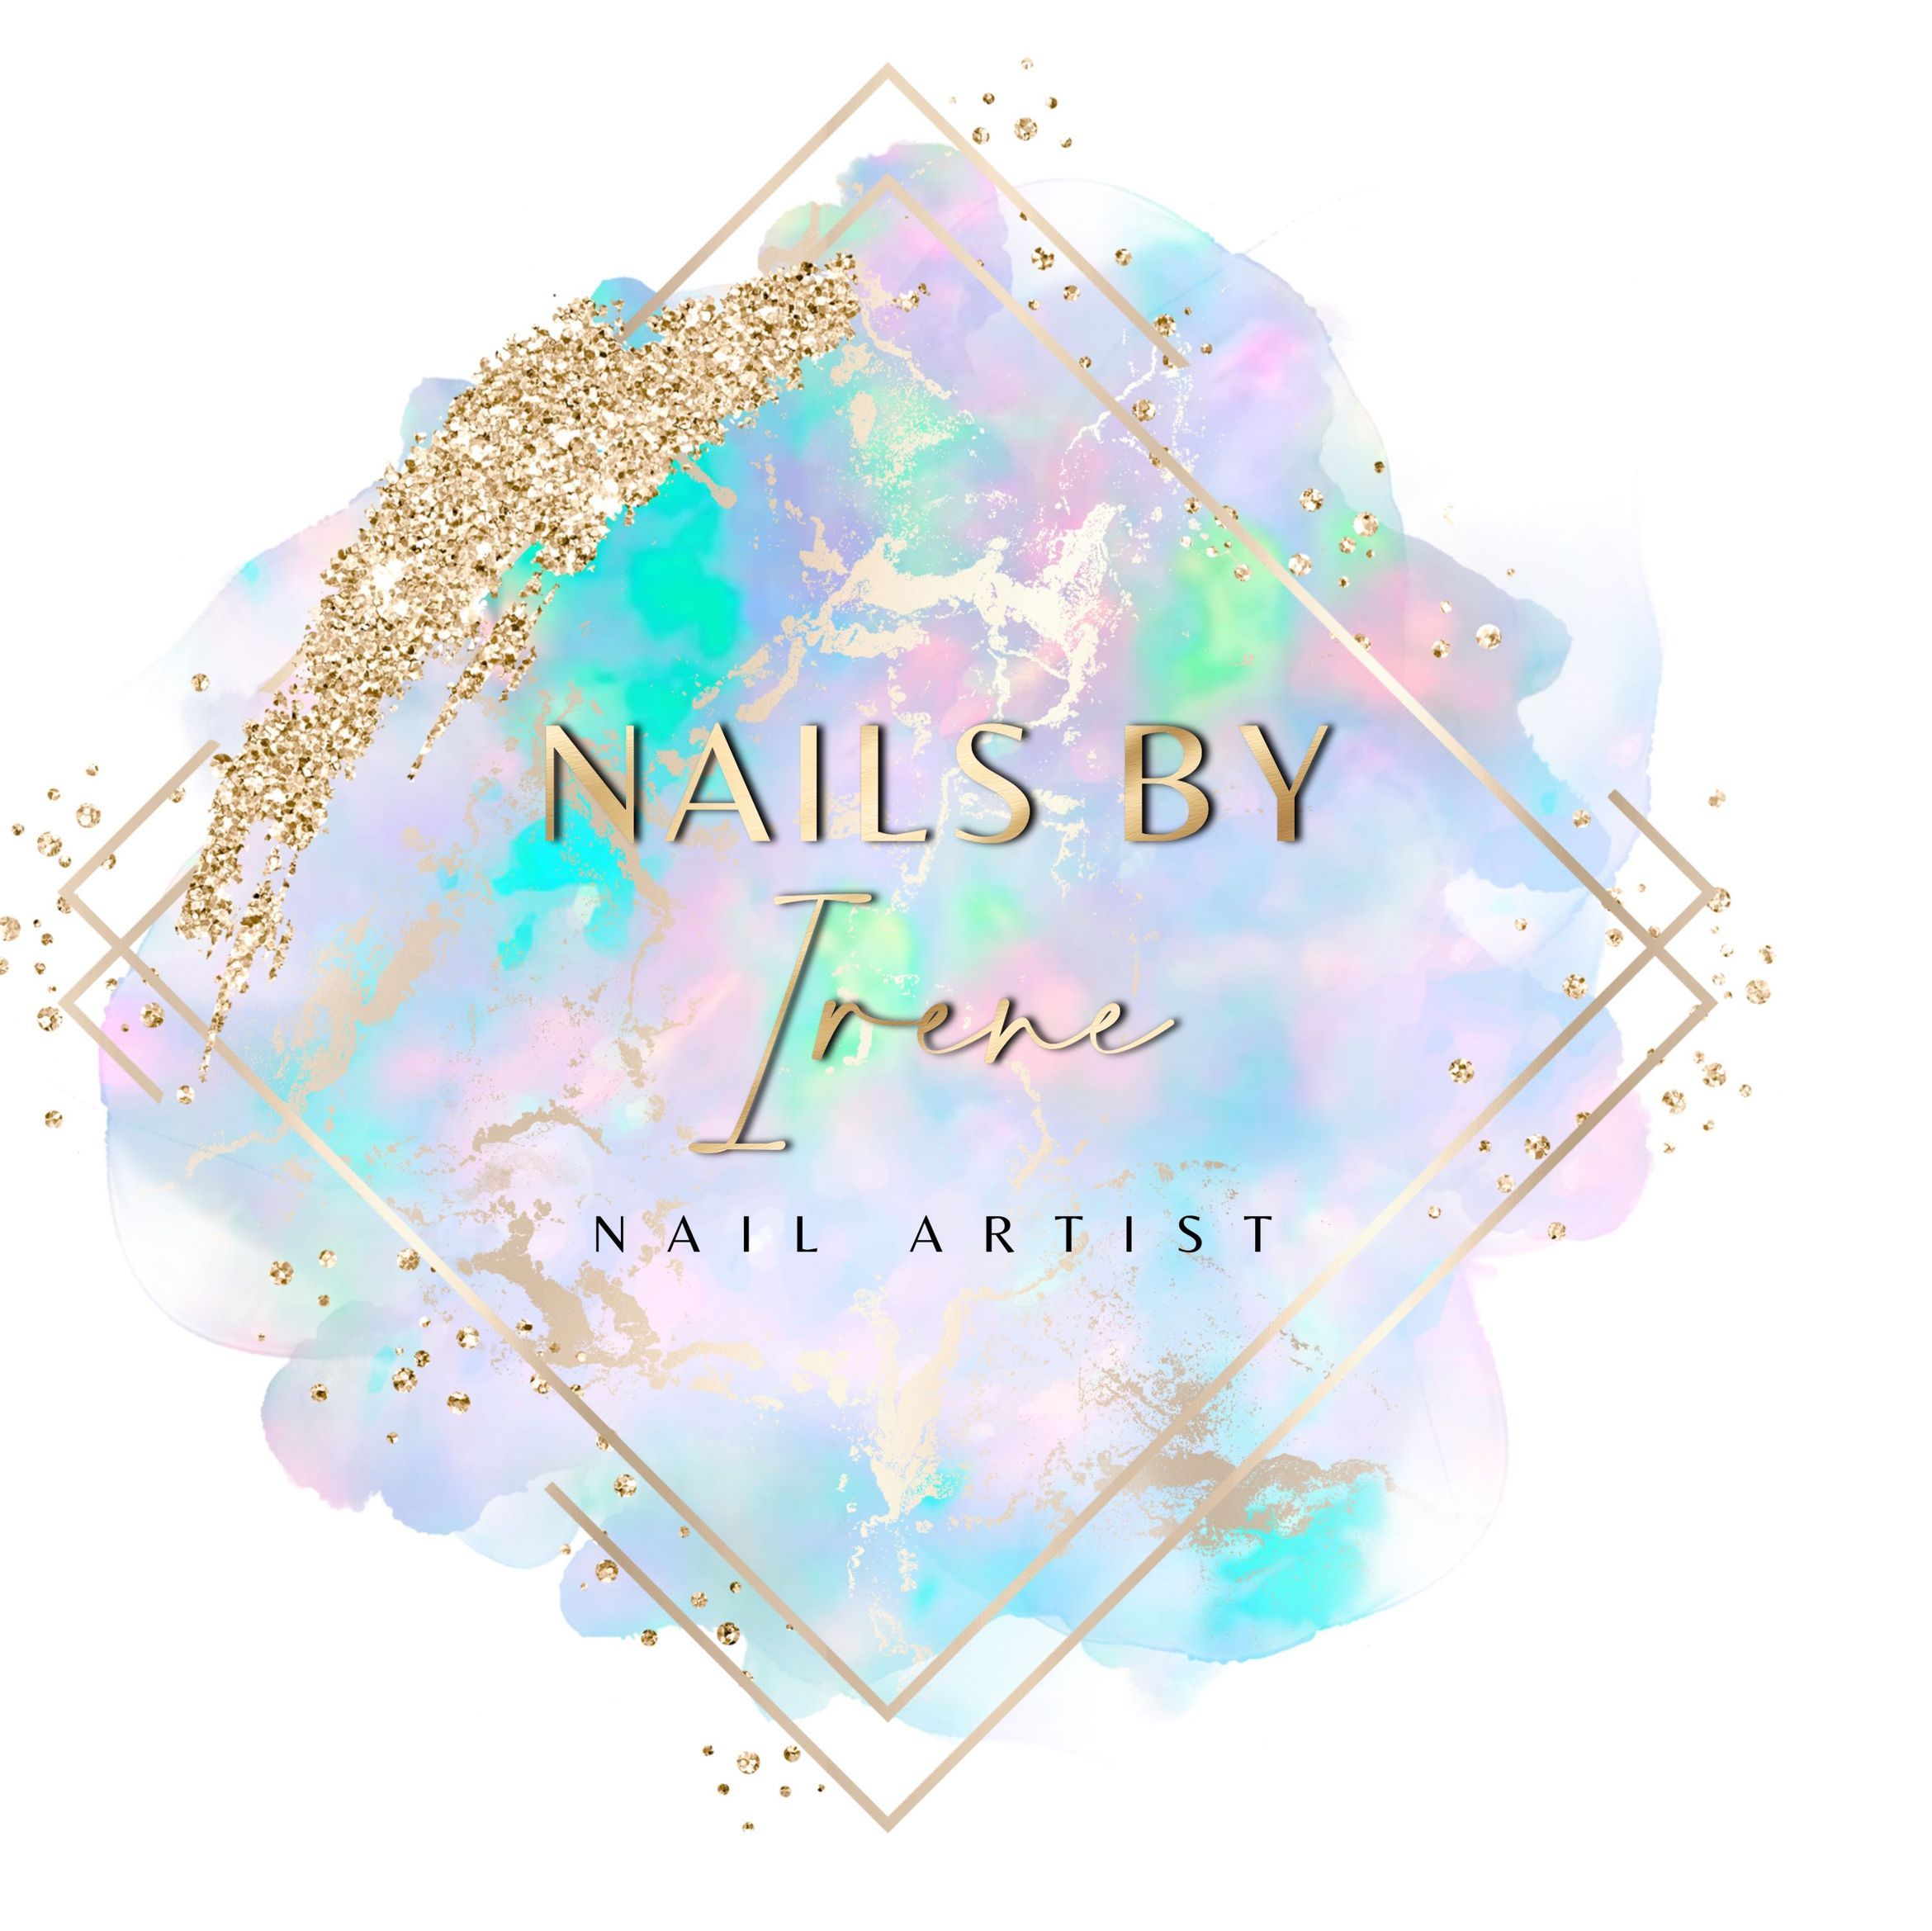 Nails By Irene, 4459 Cumberland Rd, Fayetteville, 28306